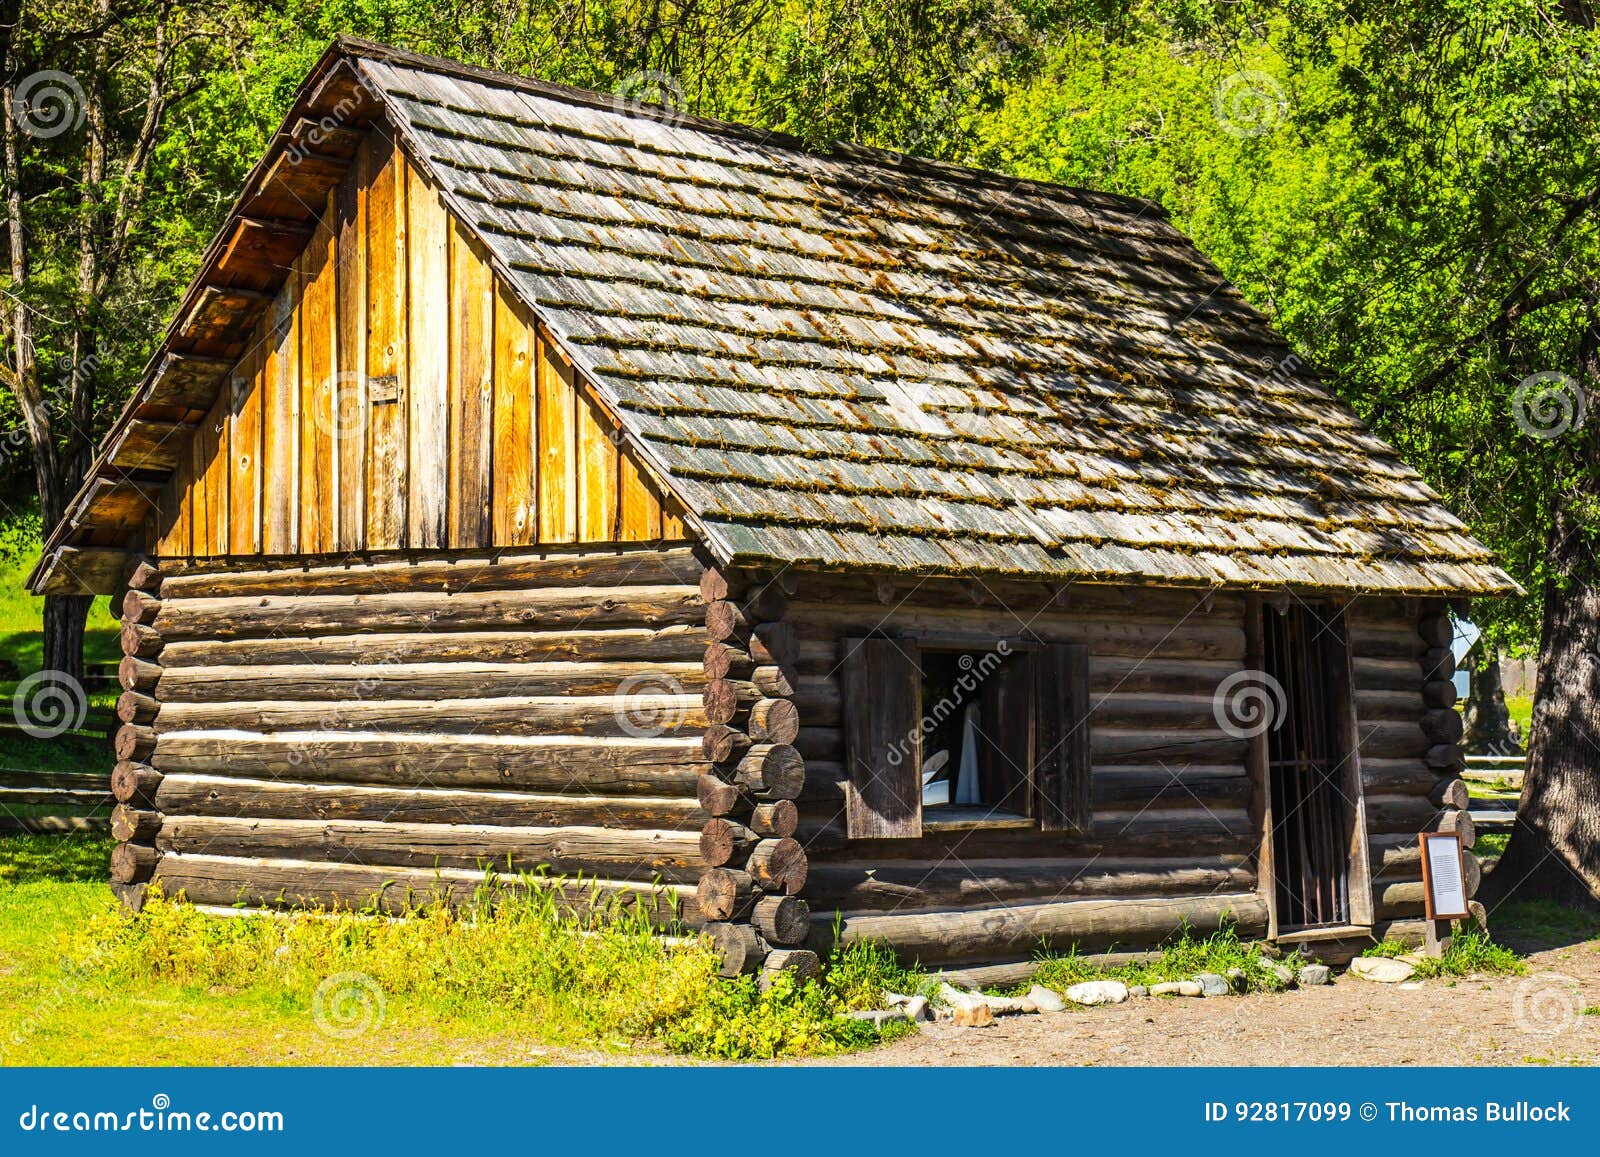 Workers Log Cabin in Old Mining Town Stock Image - Image of bars ...